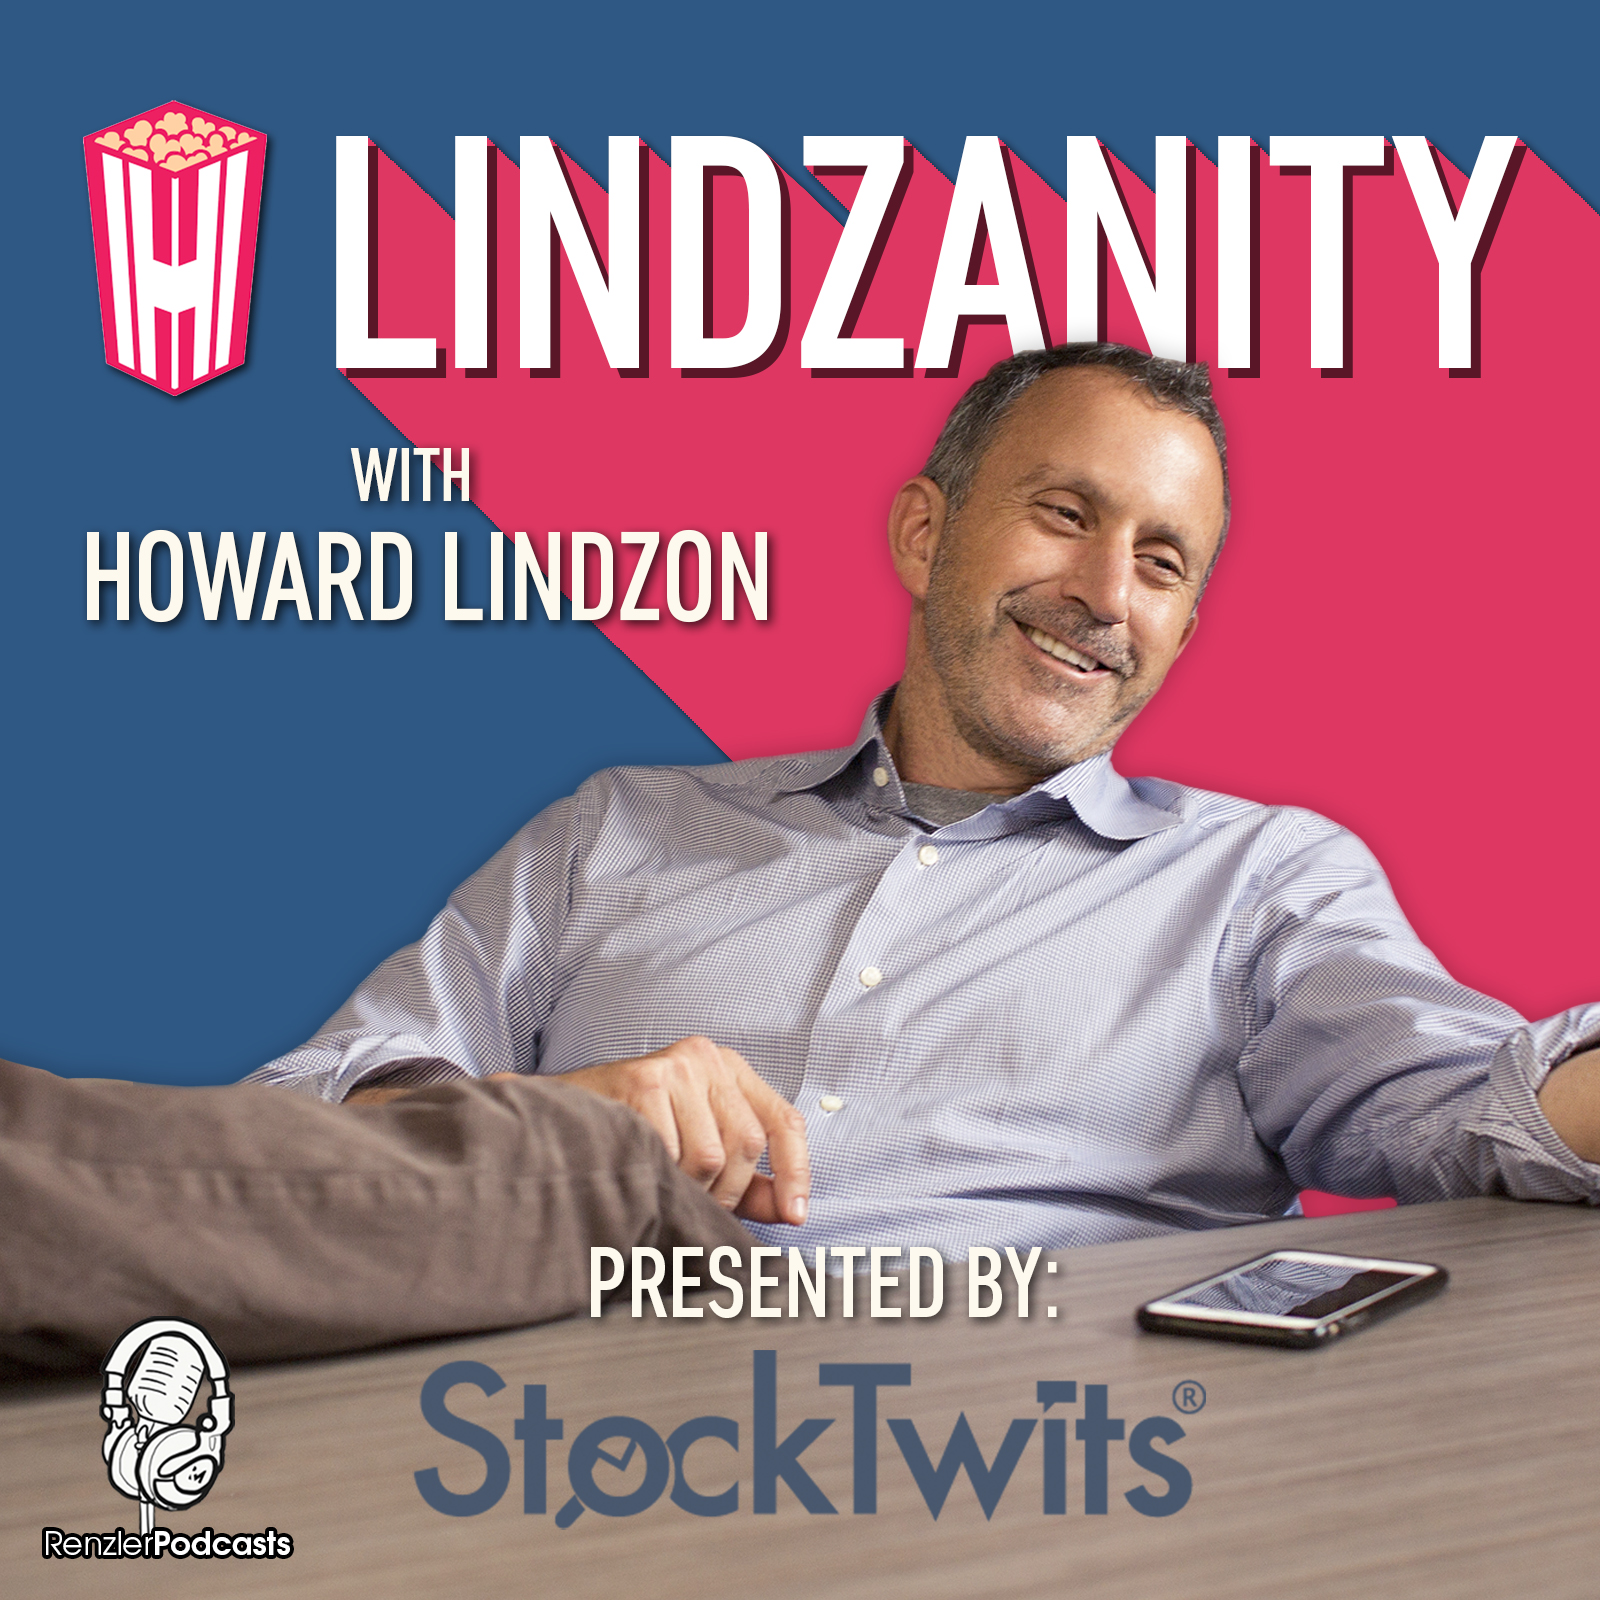 Howard Lindzon's Dream Passion Project: WeWork for the Stocktwits Community